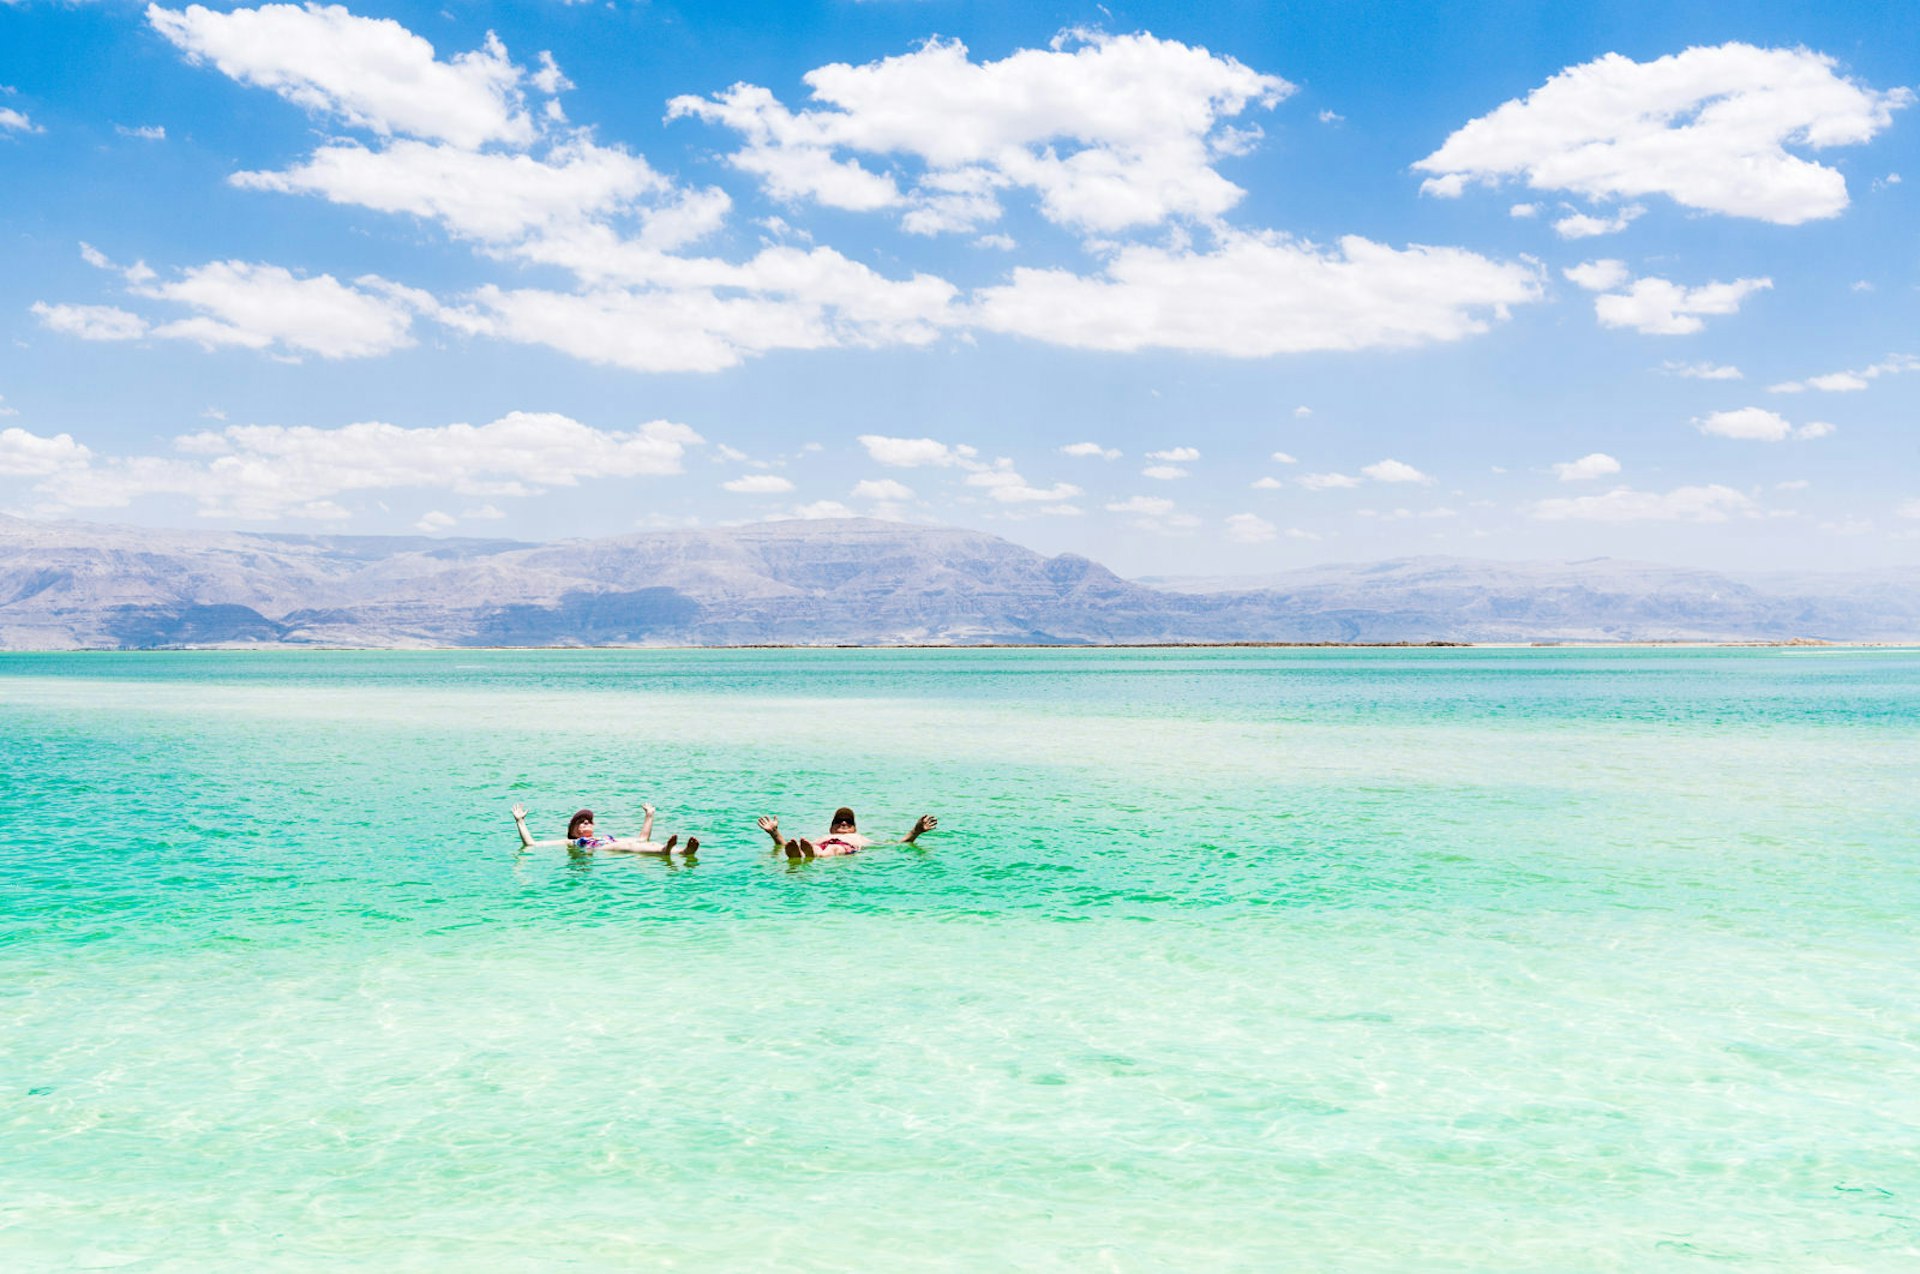 Couple relaxes in the water of the Dead Sea © Olesya Baron / Shutterstock